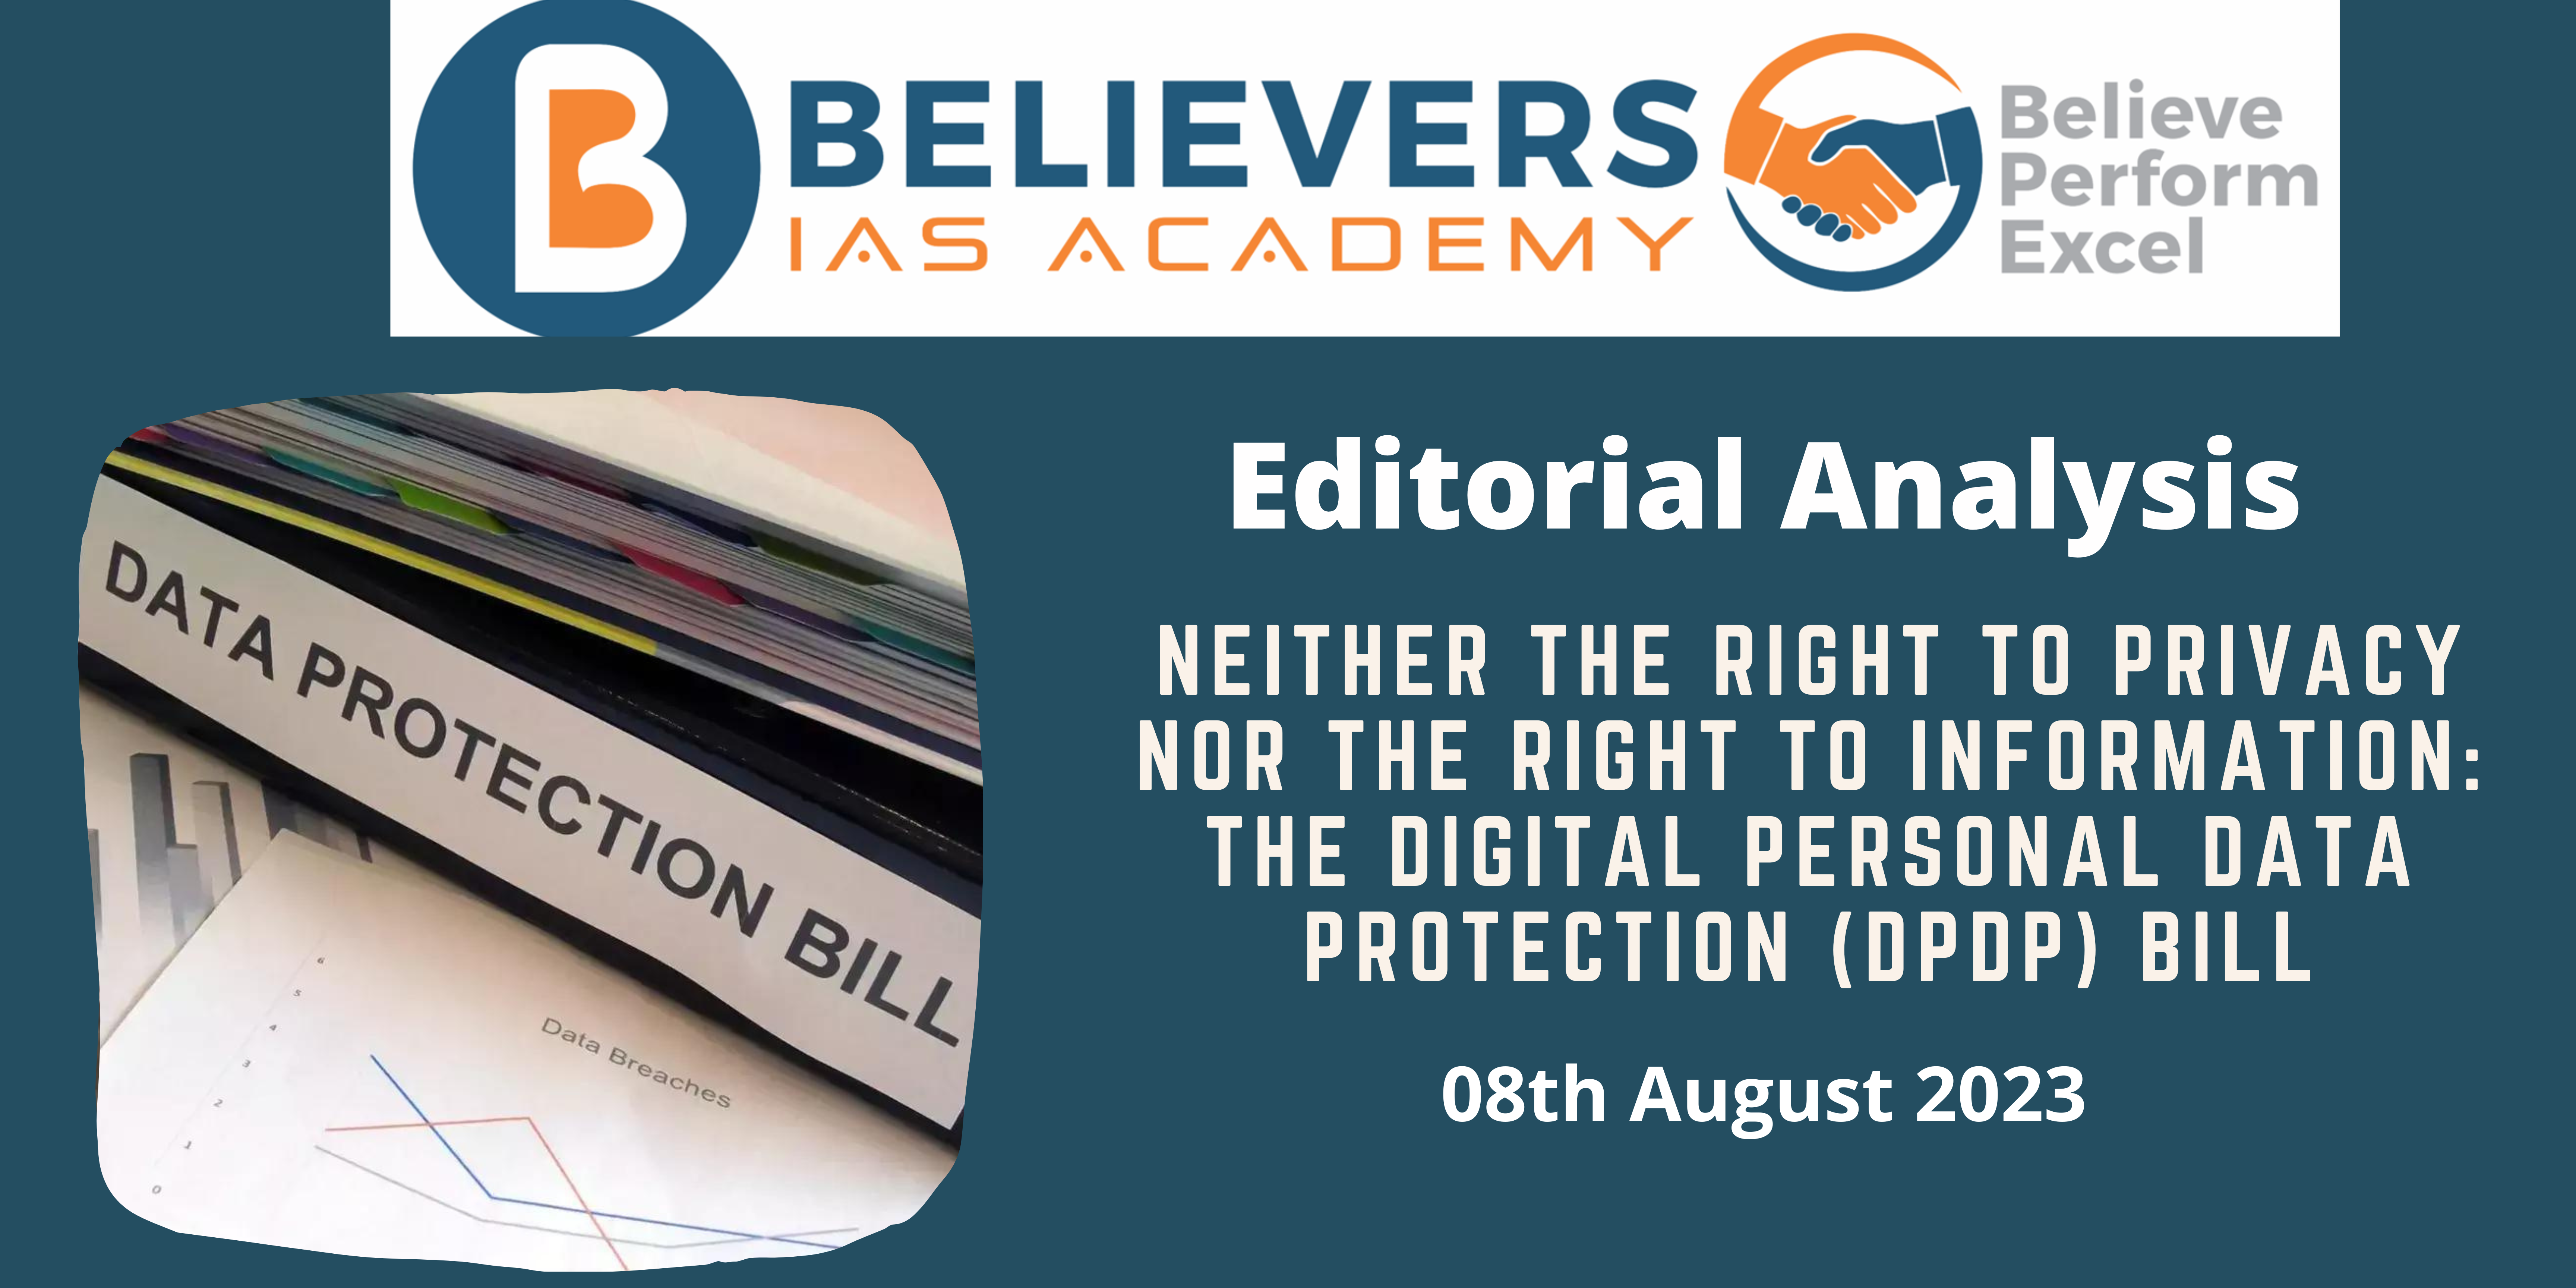 Neither the right to privacy nor the right to information: The Digital Personal Data Protection (DPDP) Bill